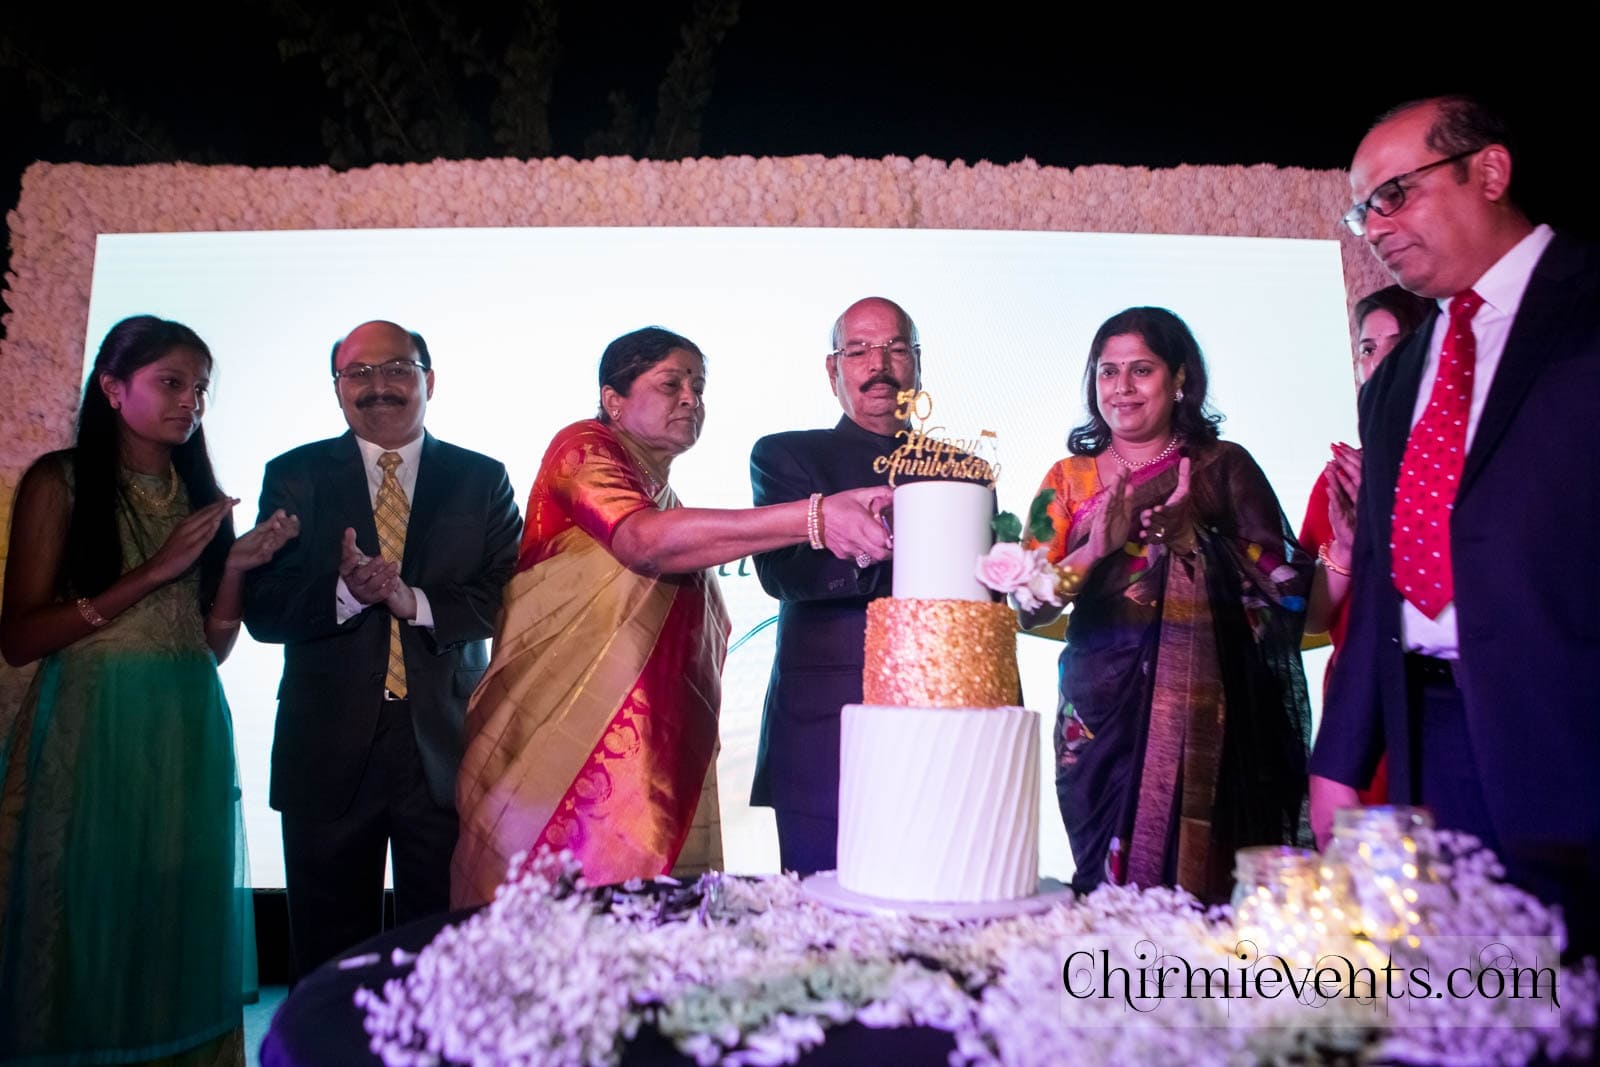 Chirmi Events is the top wedding planners in Bangalore, having expertise of more than 8 years. We are also known as the only wedding planners in Bangalore